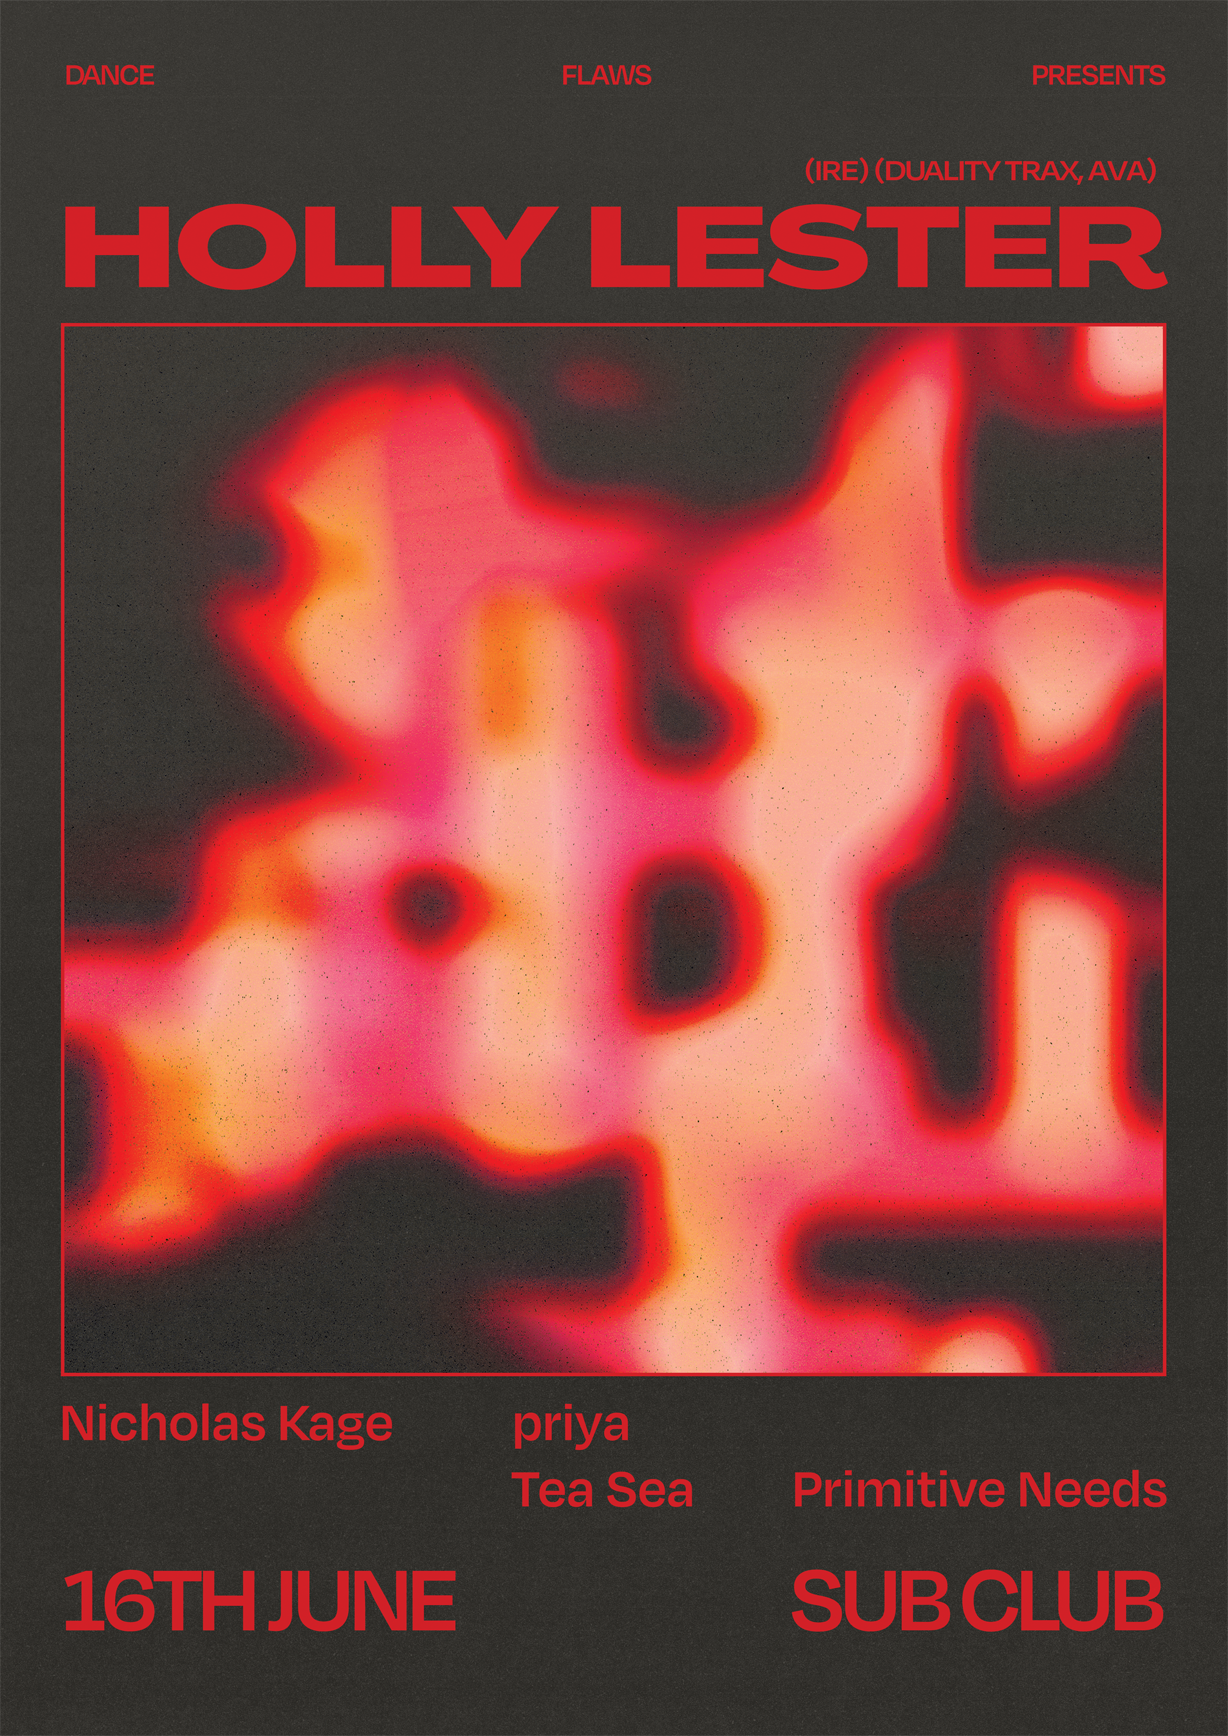 Dance Flaws: Holly Lester (IRE) [Duality Trax, AVA] - Página frontal